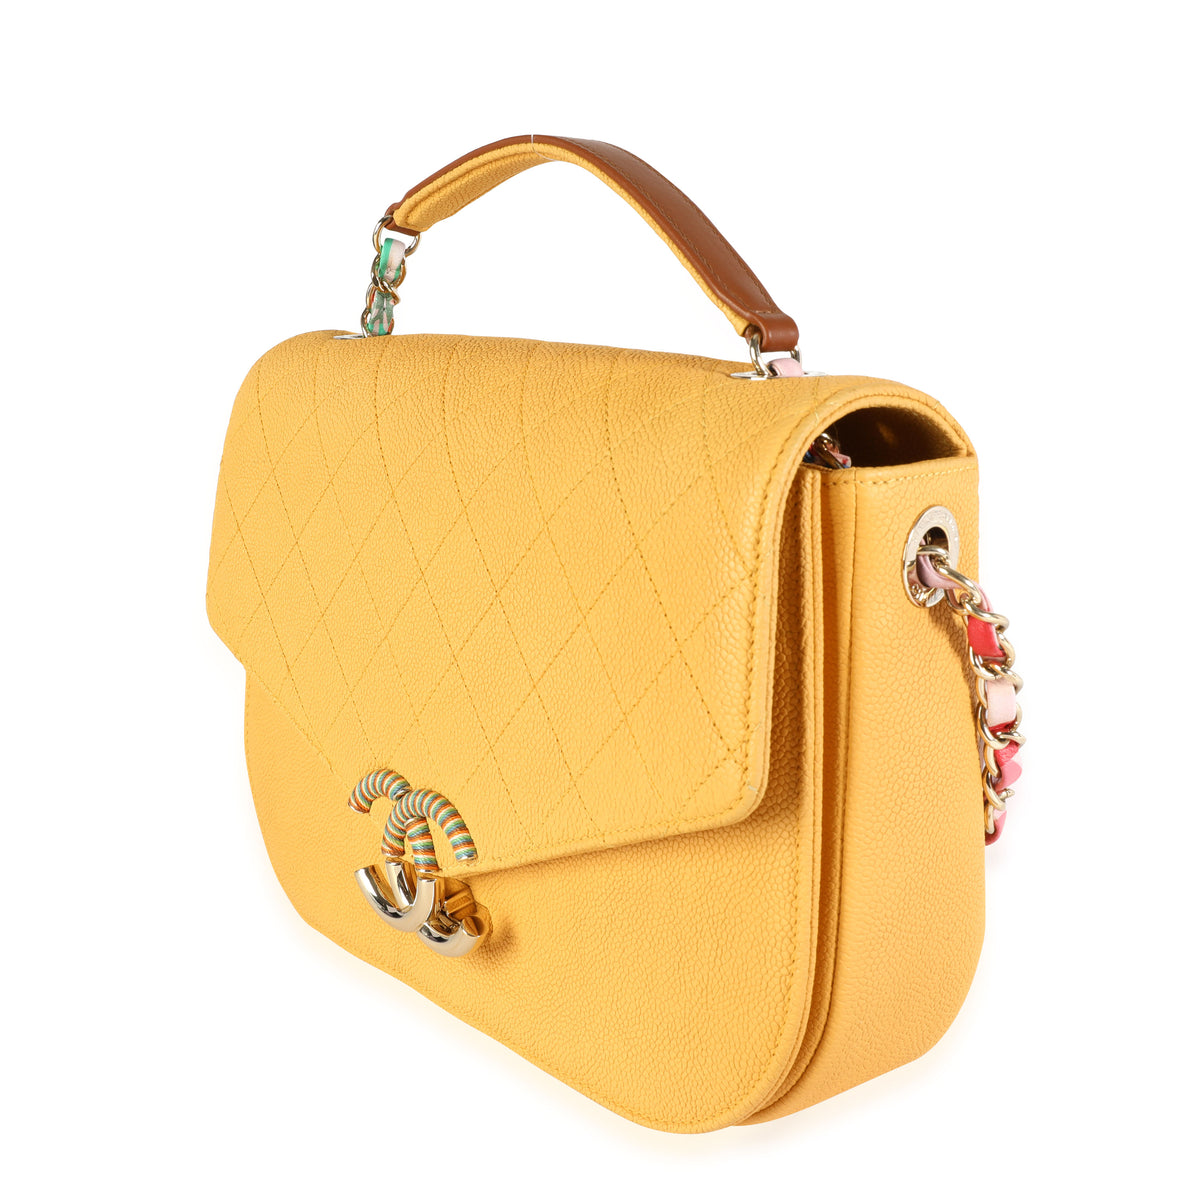 Chanel Yellow Caviar Quilted Leather Cuba Flap Bag